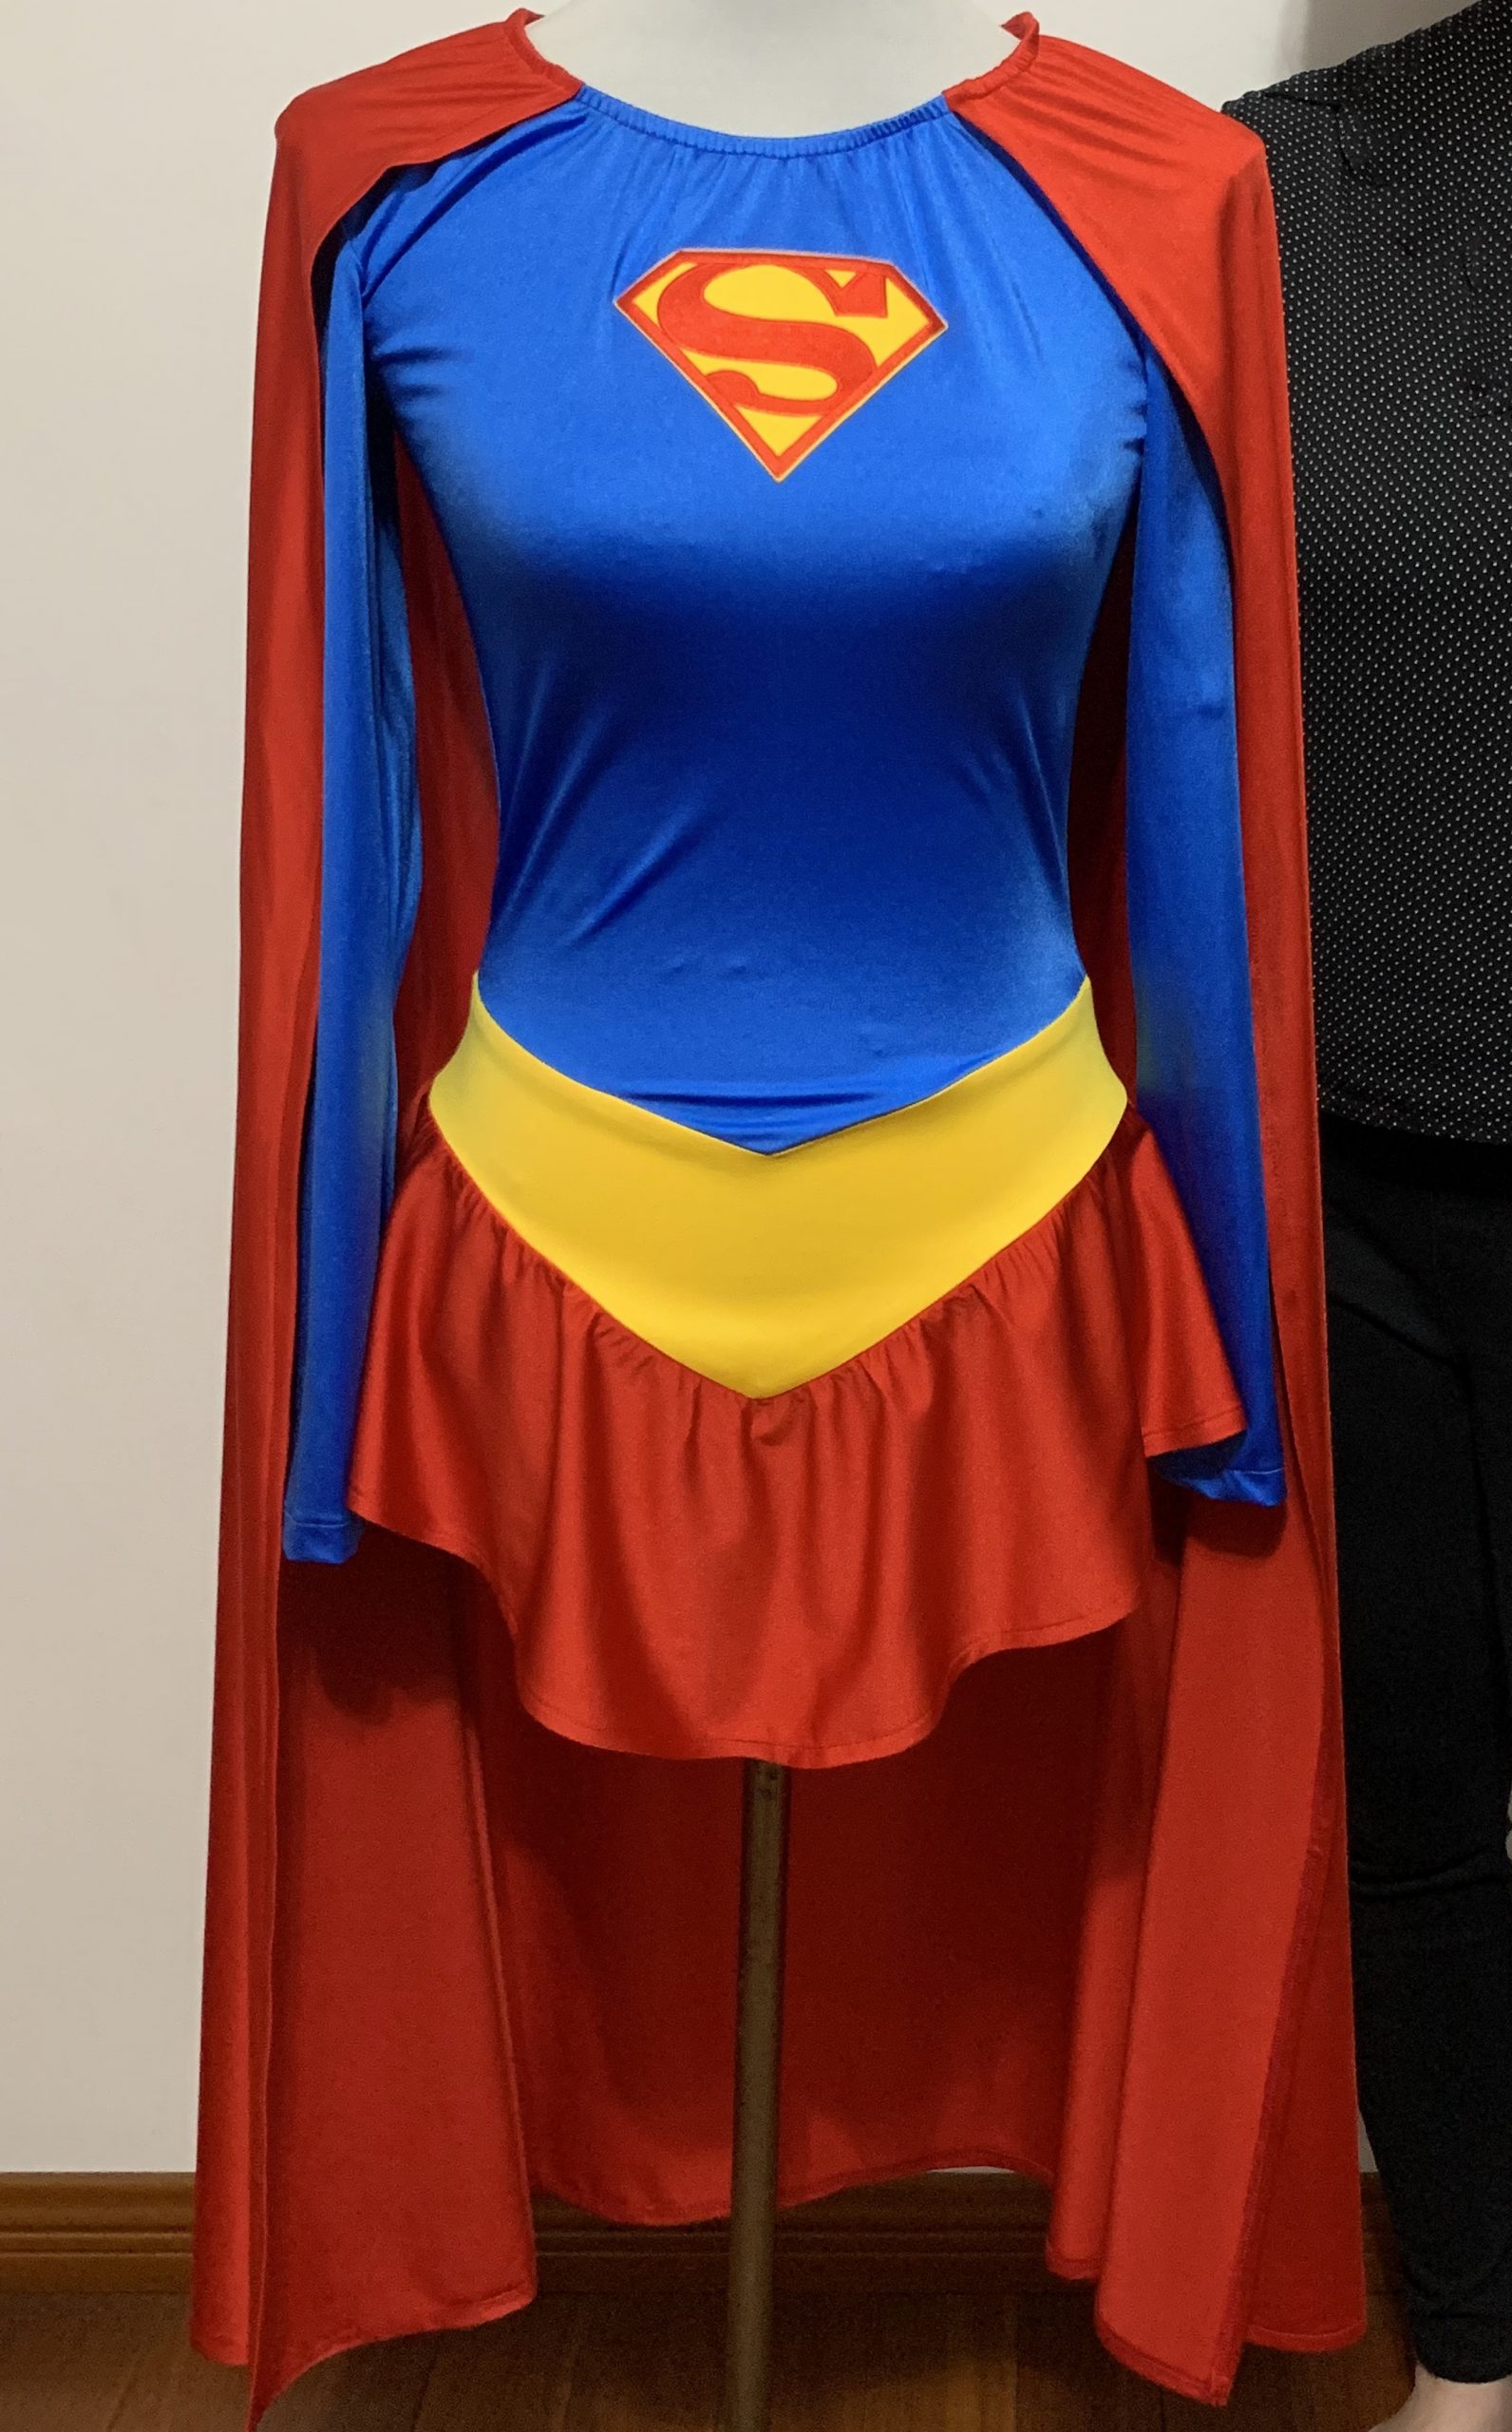 Read more about the article Our new Supergirl Matrix battlesuit!